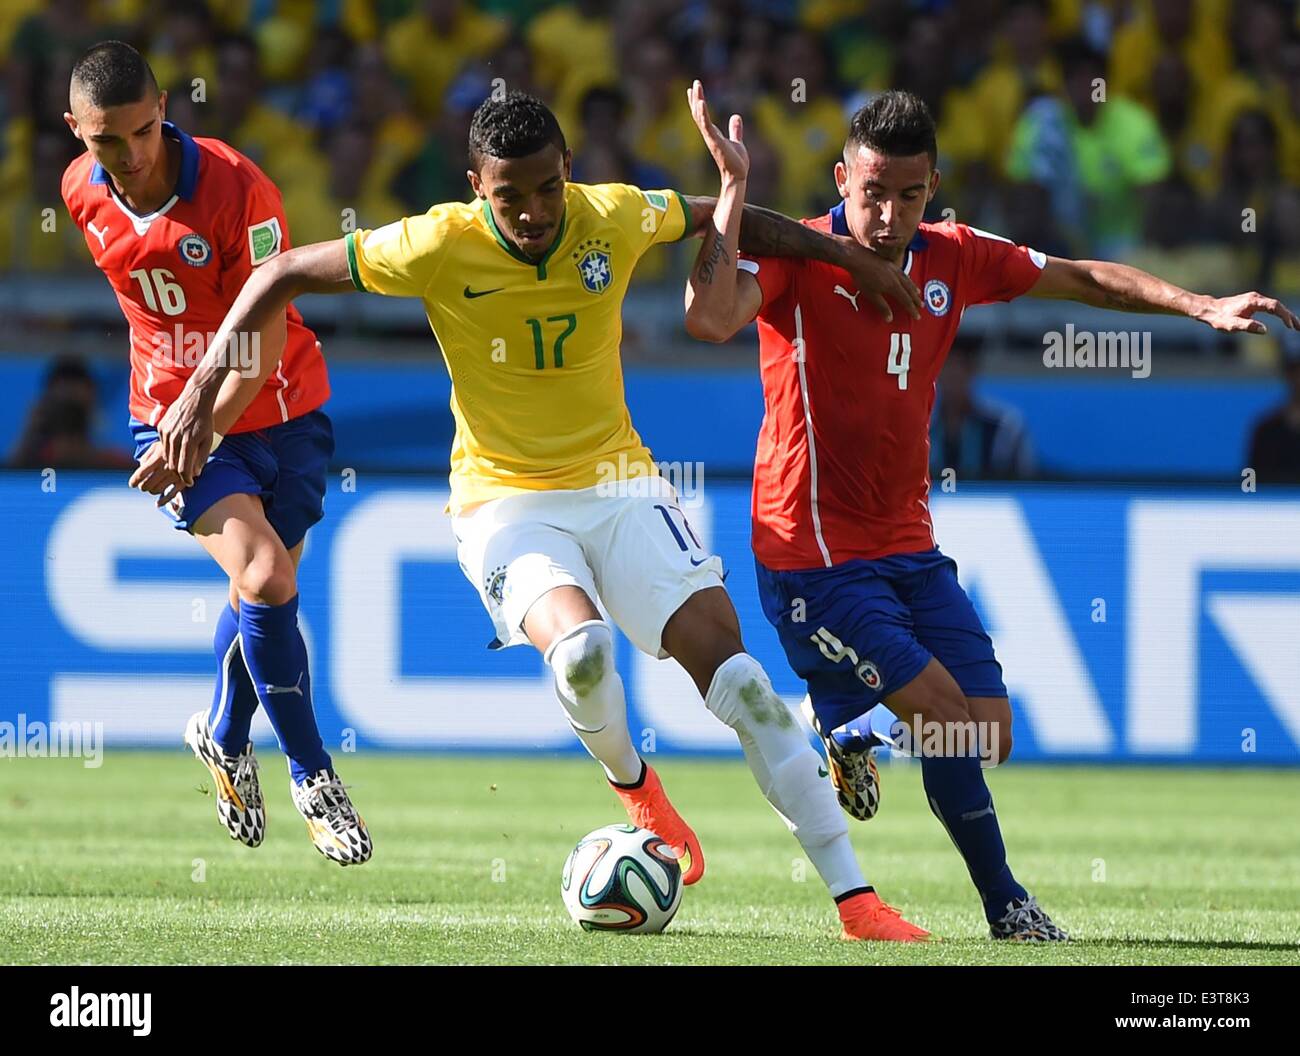 Belo Horizonte, Brazil. 28th June, 2014. Brazil's Luiz Gustavo vies with Chile's Mauricio Isla during a Round of 16 match between Brazil and Chile of 2014 FIFA World Cup at the Estadio Mineirao Stadium in Belo Horizonte, Brazil, on June 28, 2014. Credit:  Liu Dawei/Xinhua/Alamy Live News Stock Photo